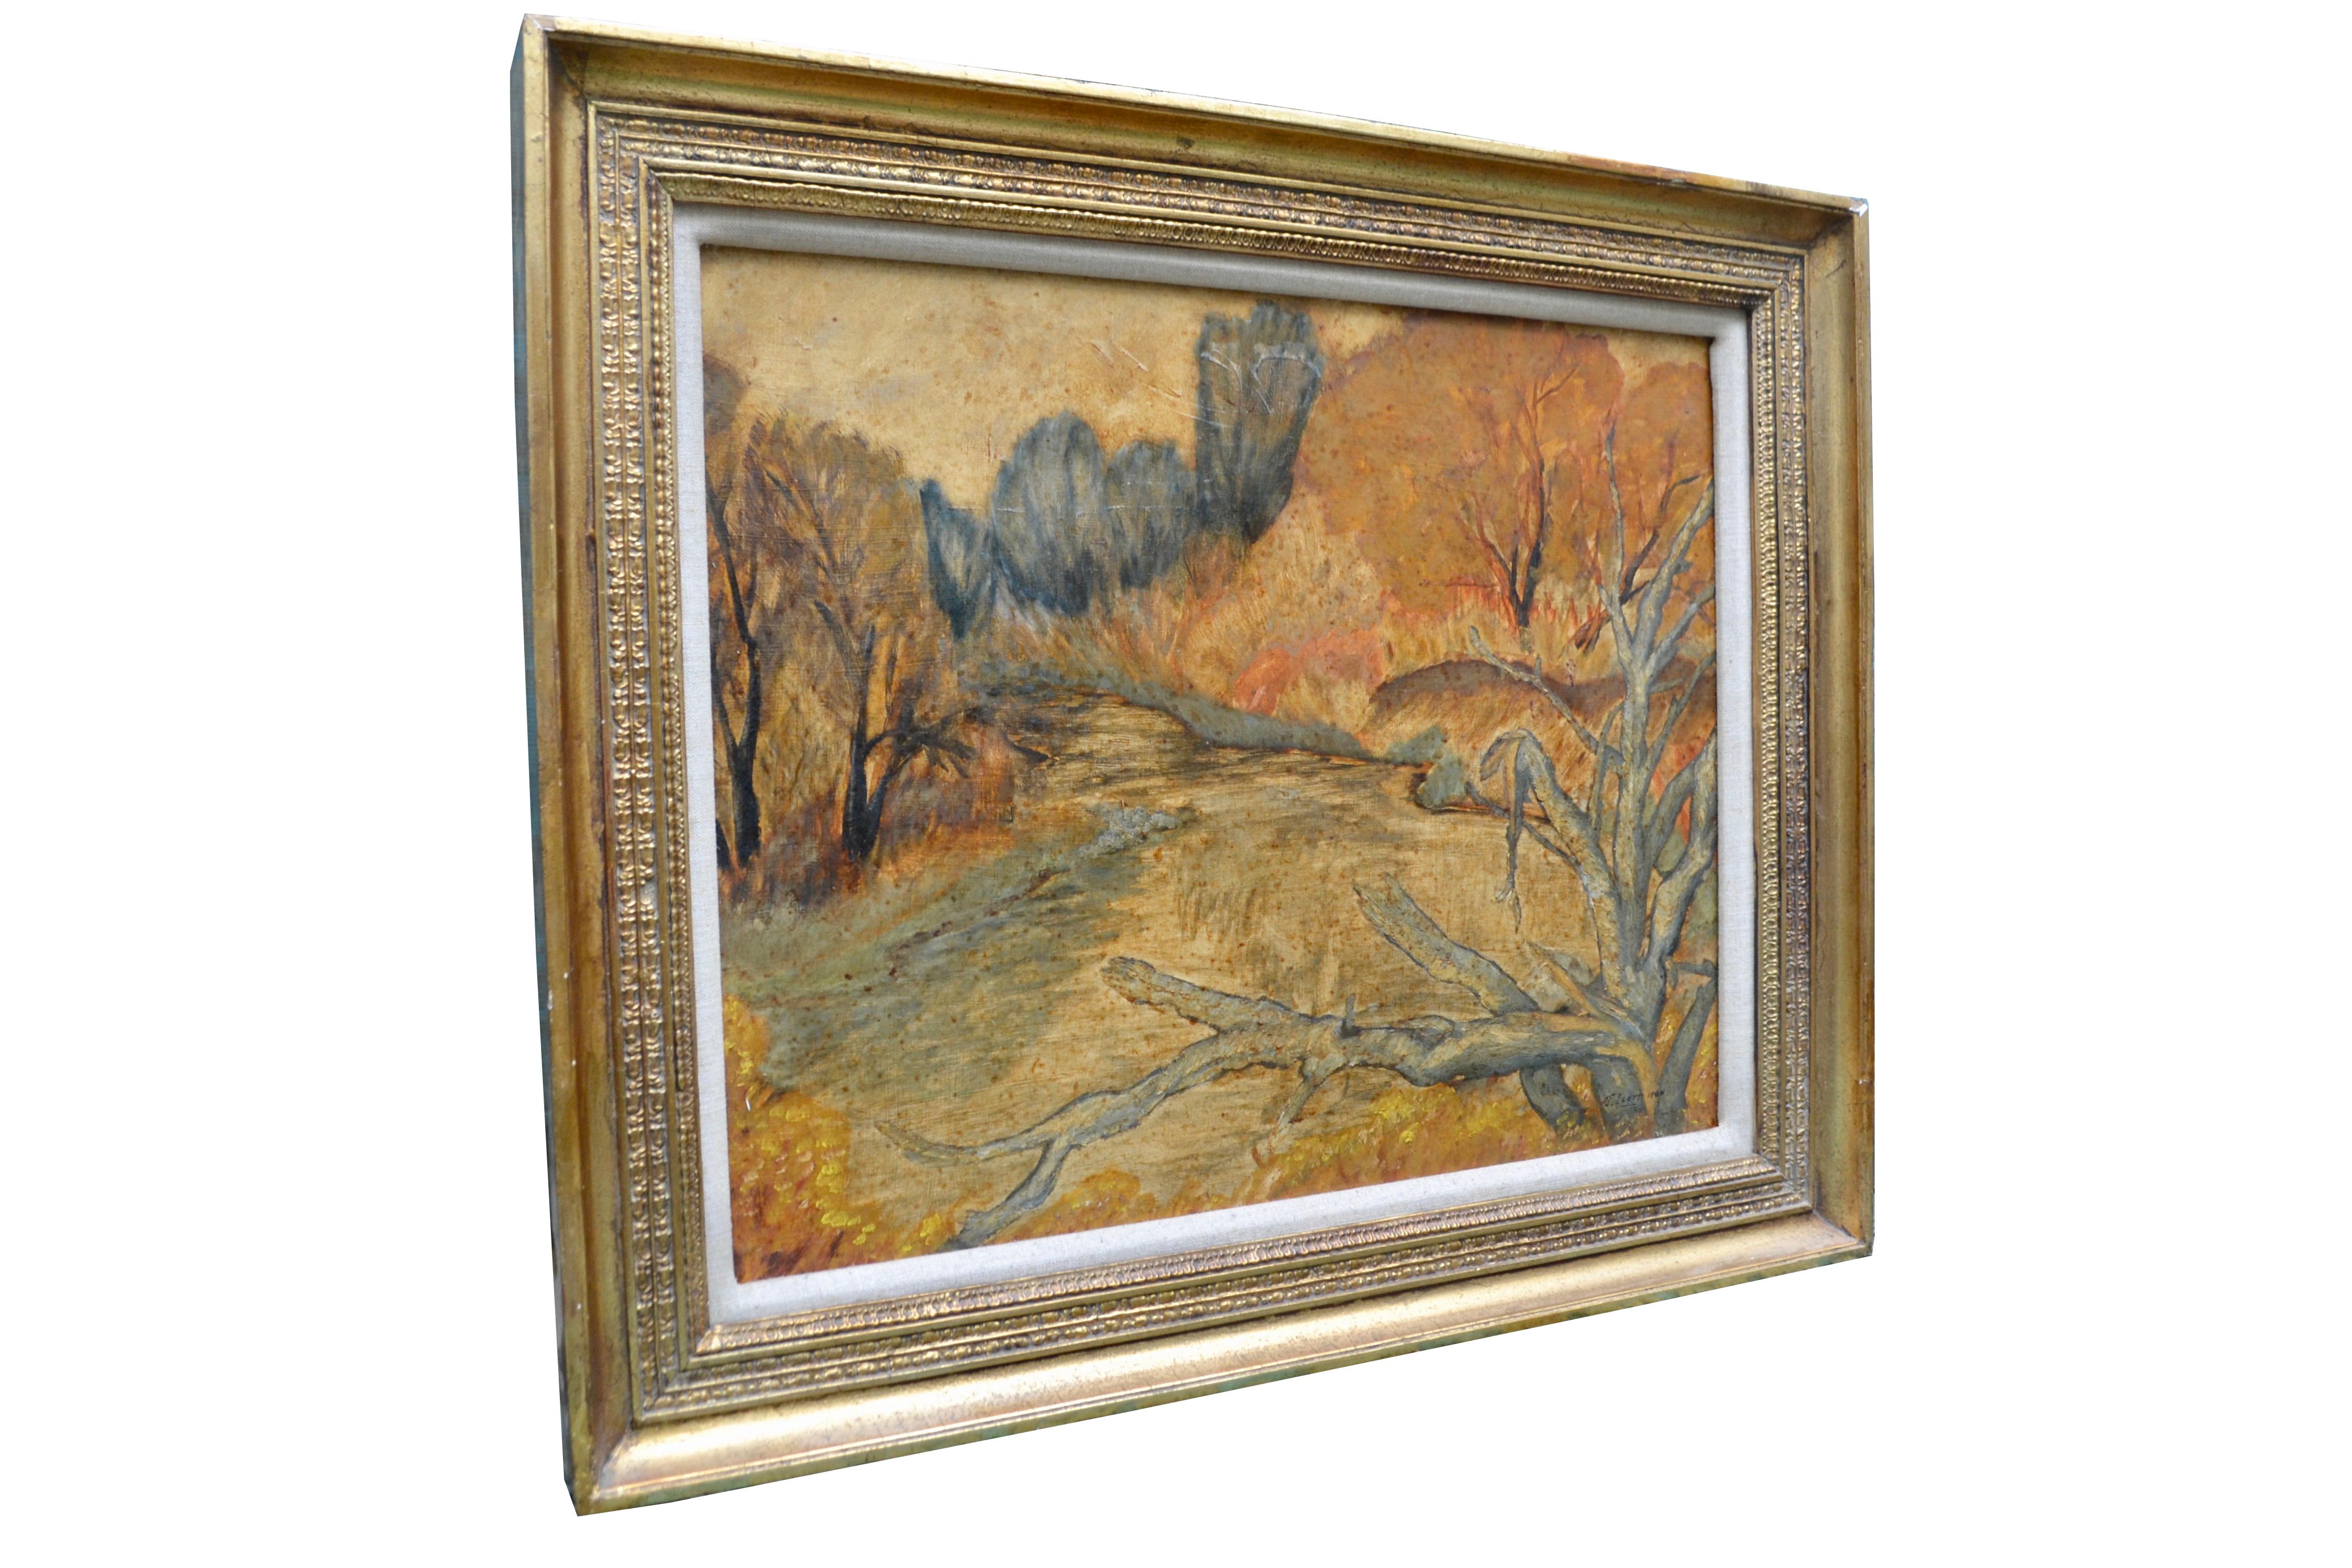 A nicely painted impressionist oil on hardboard painting of a typical orange and brown hued Southern Ontario Autumn the North East American and Canadian States and Provinces are famous for in the Fall. The painting is presented in the original